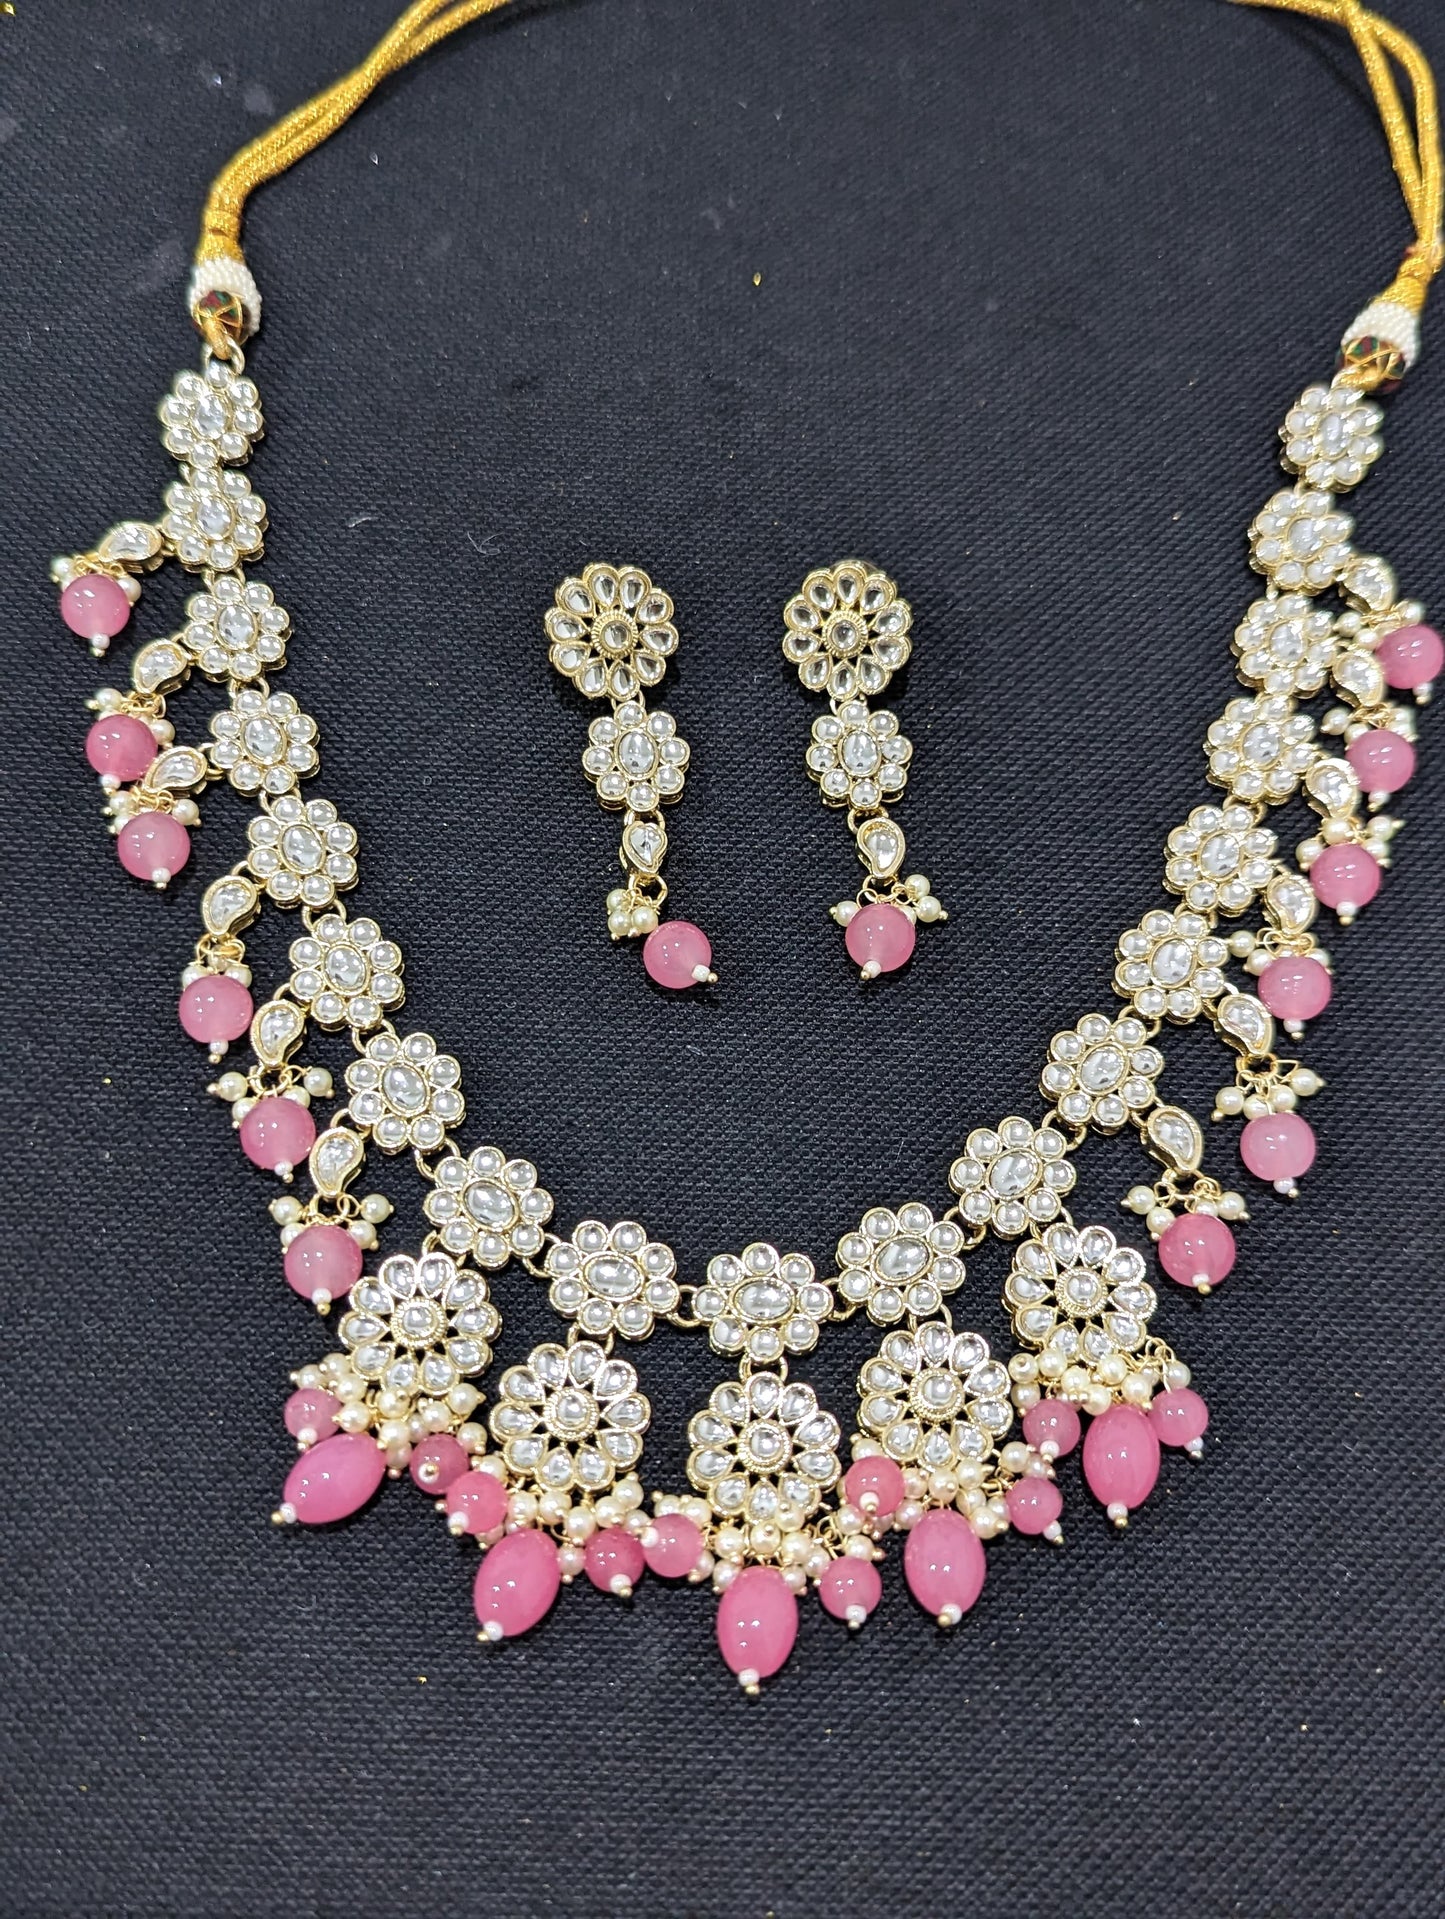 Colorful Kundan Necklace and Earrings set